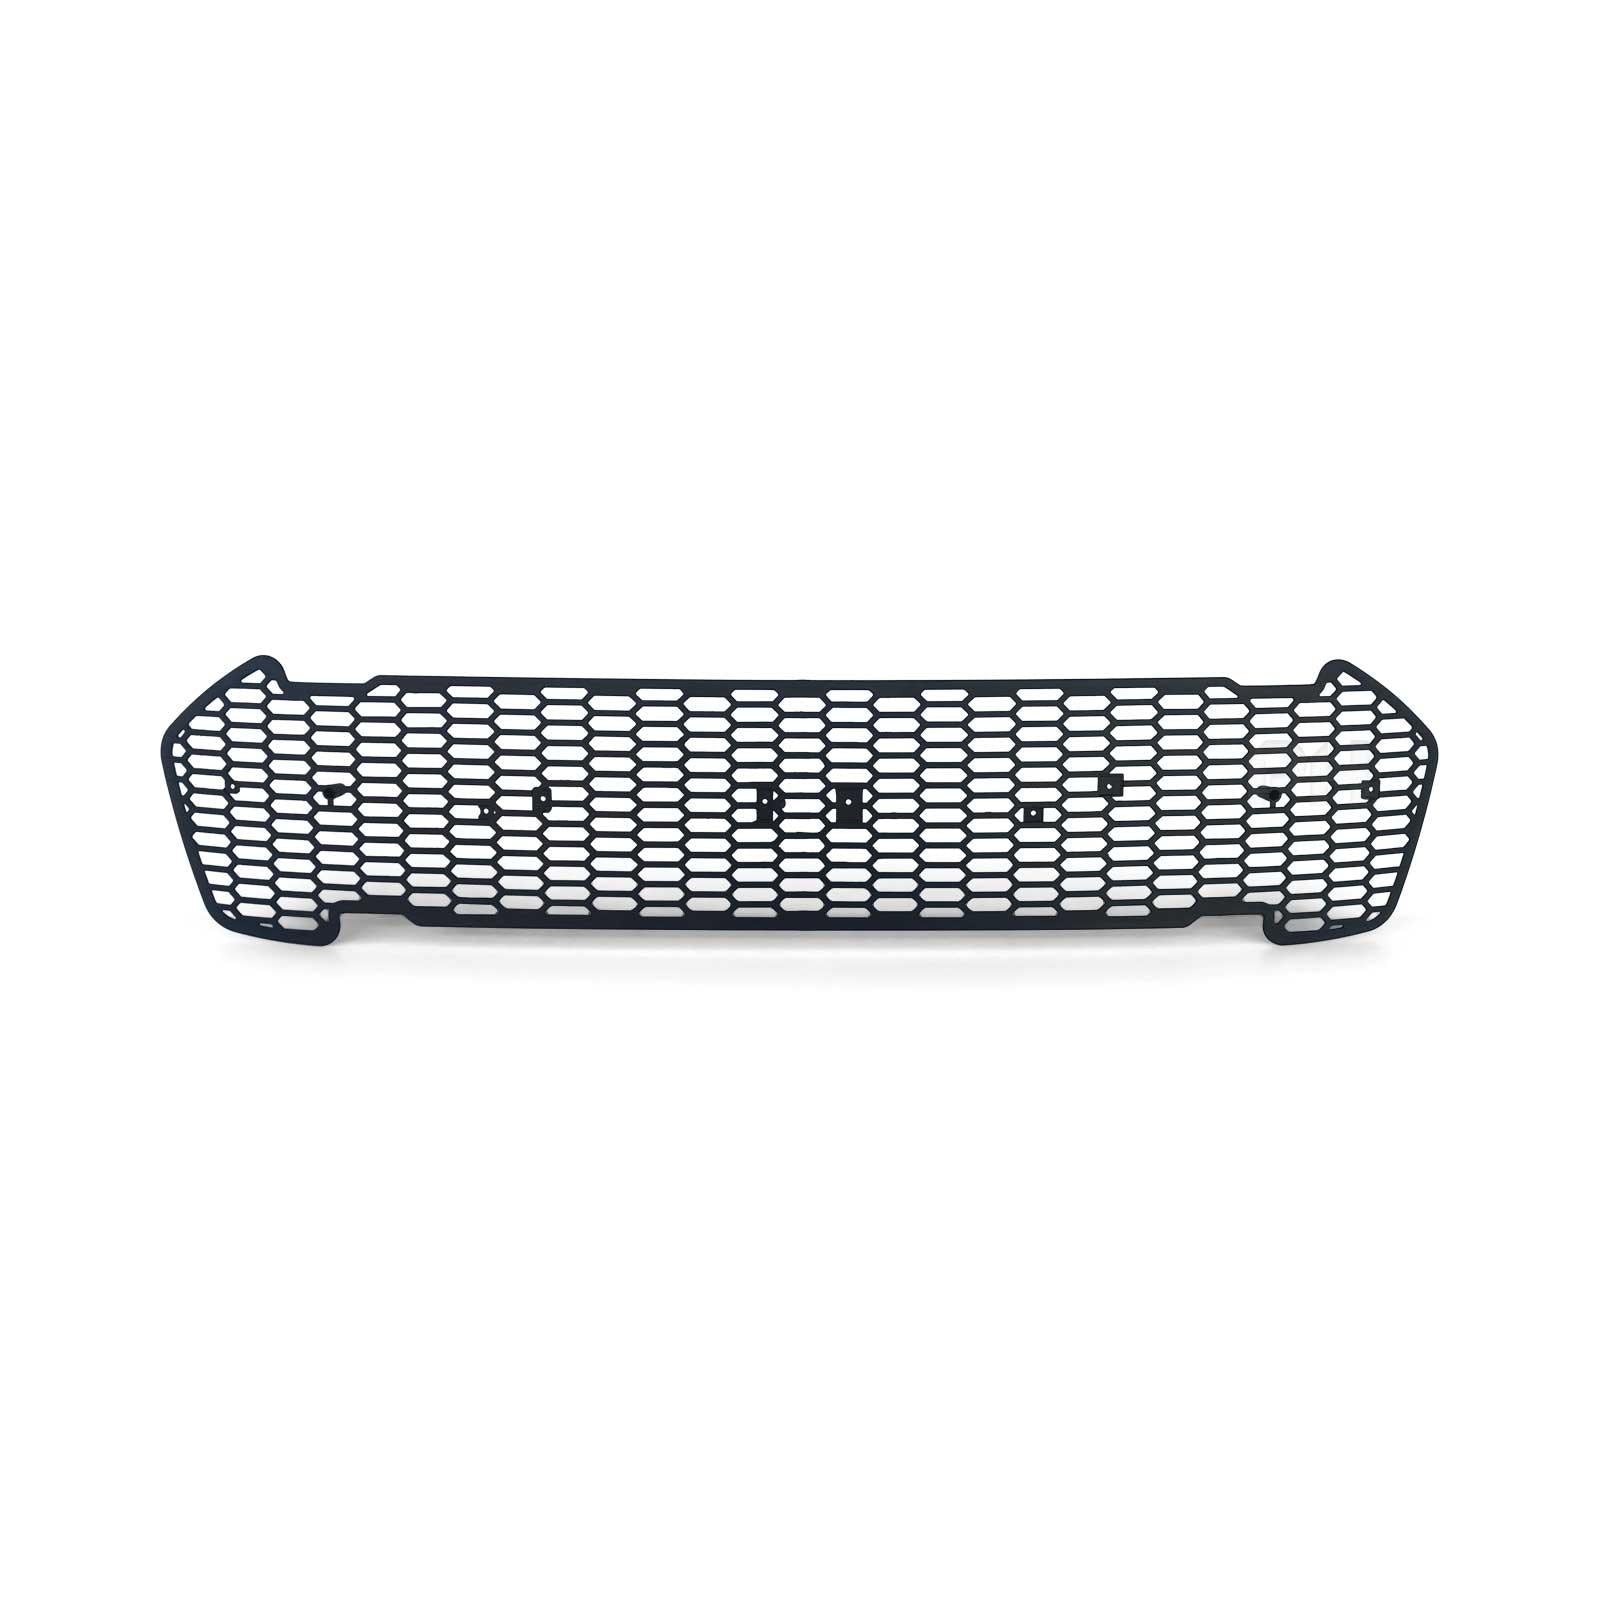 Mesh Front Grill Red F Style fits Ford Ranger MK2 PX2 Raptor XLT Wildtrak 2015-2018 - 4X4OC™